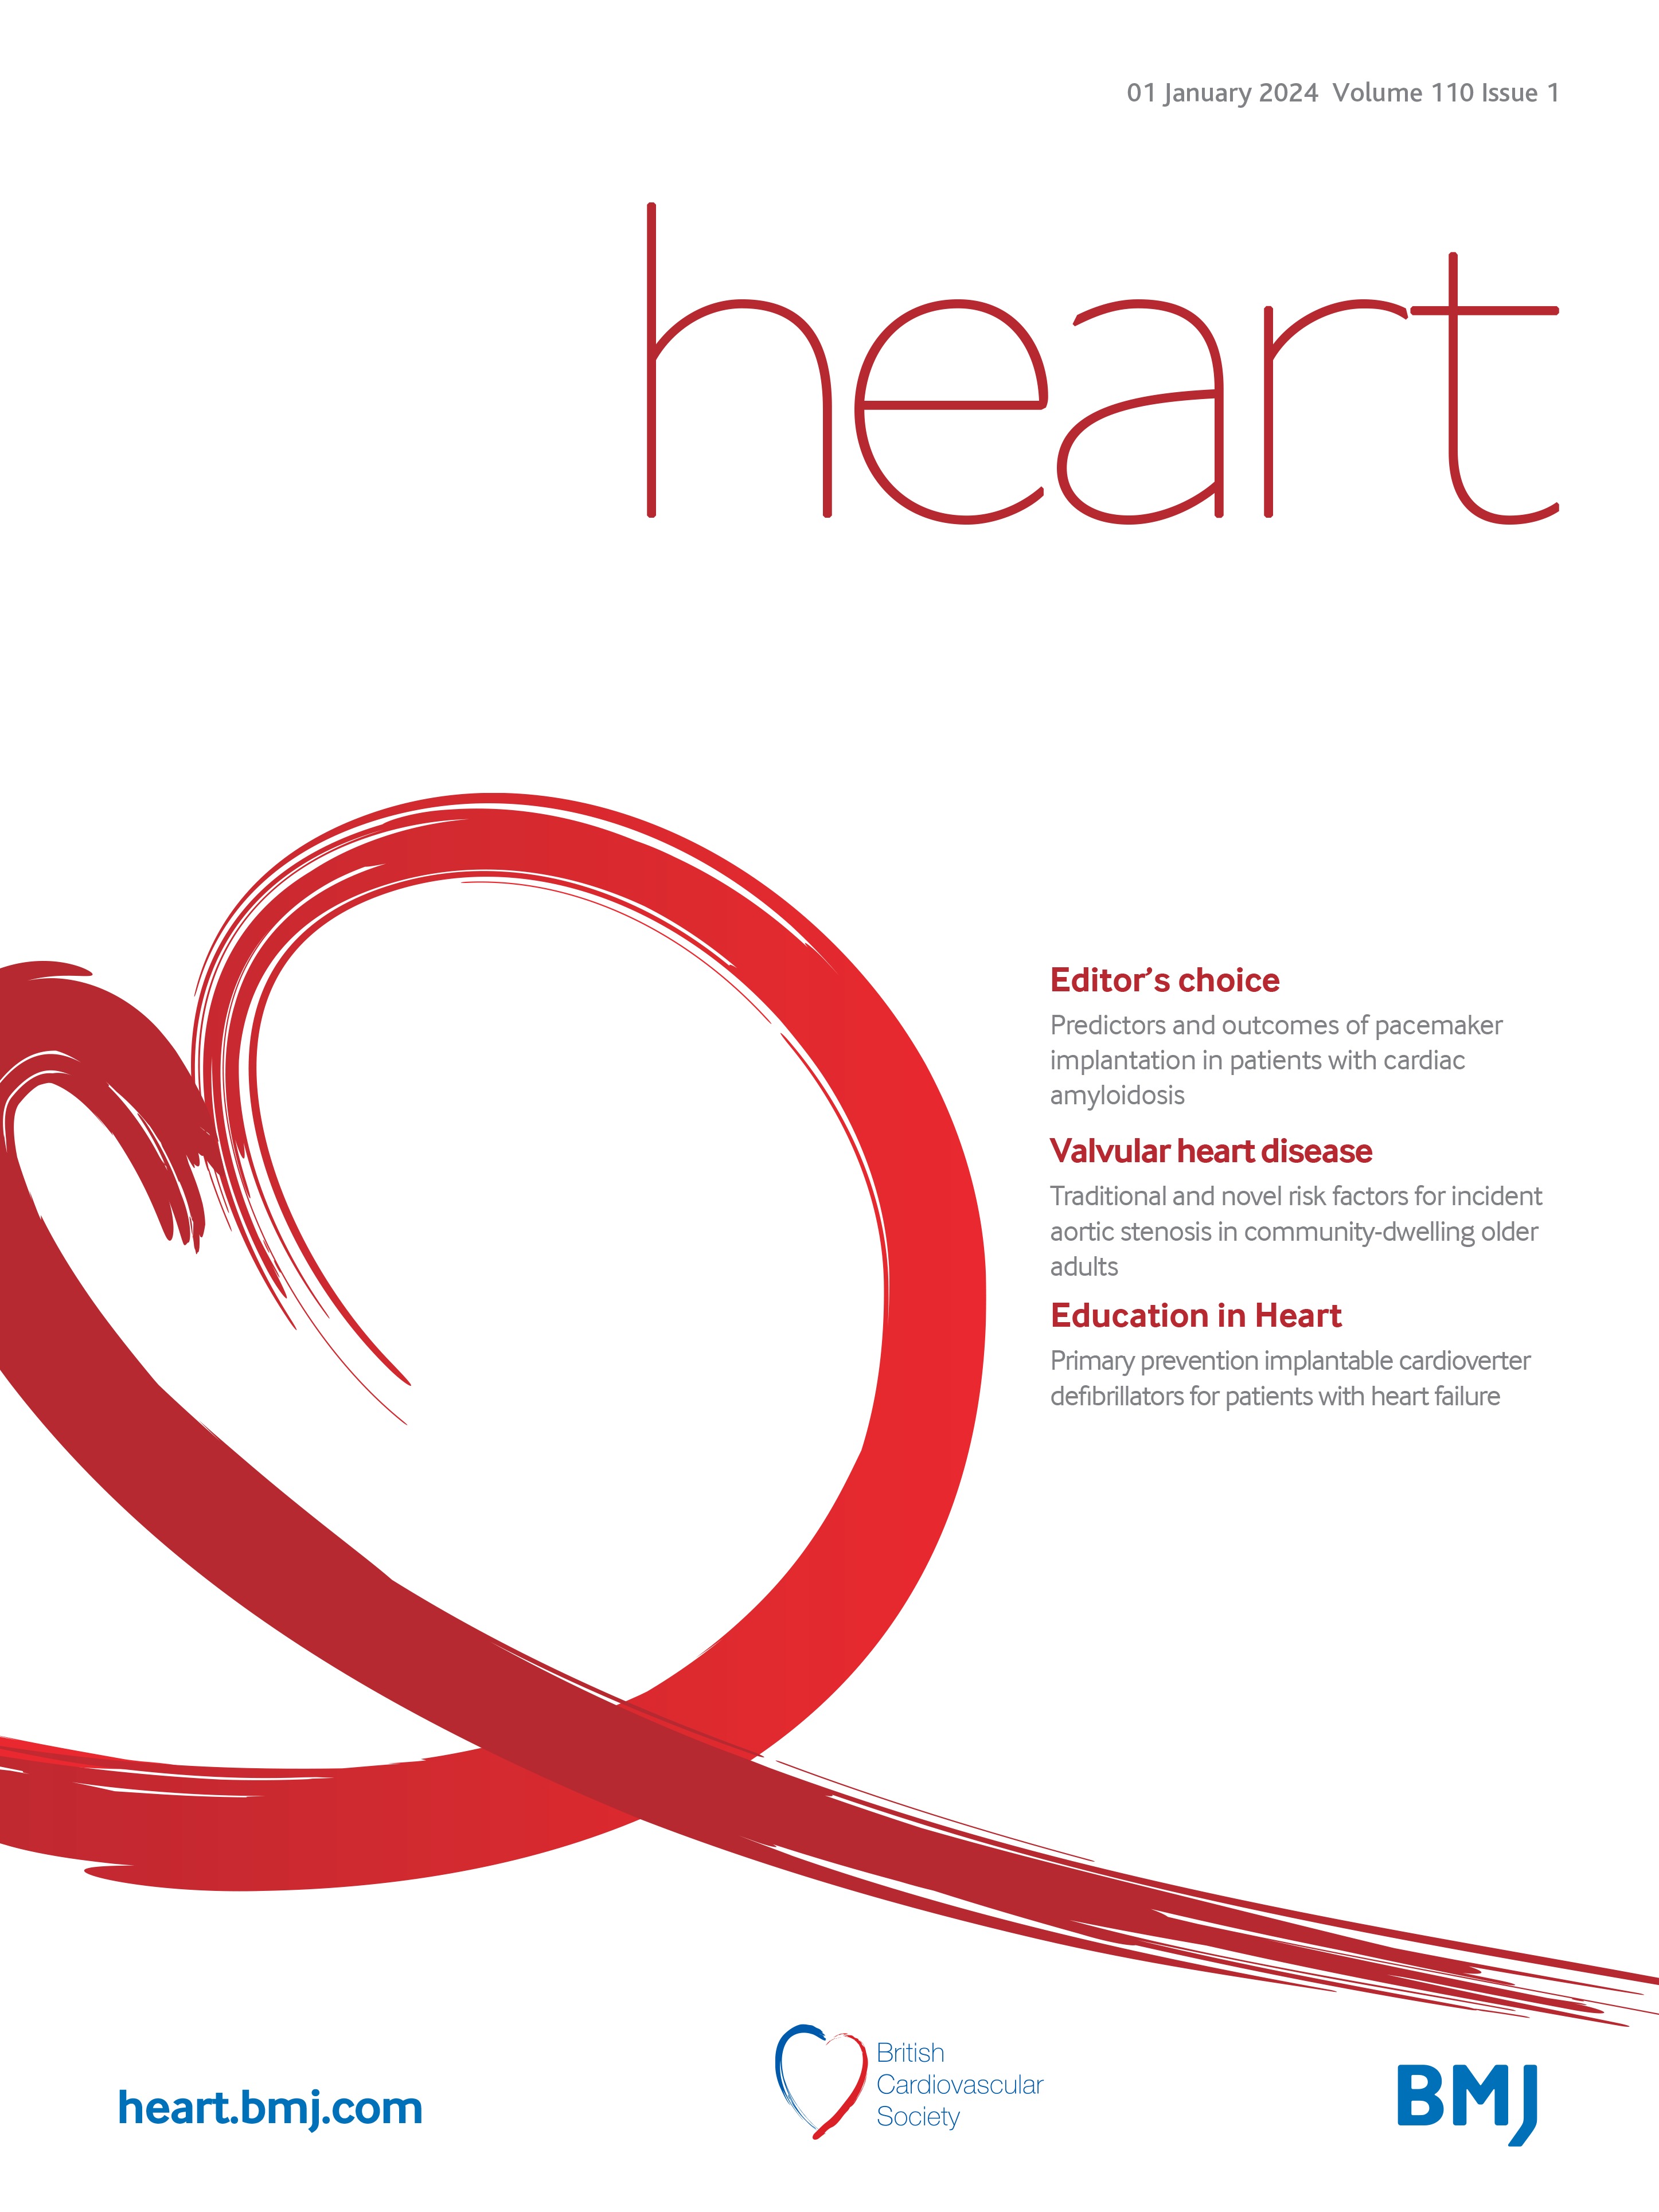 Parameters associated with improvement of systolic function in patients with heart failure